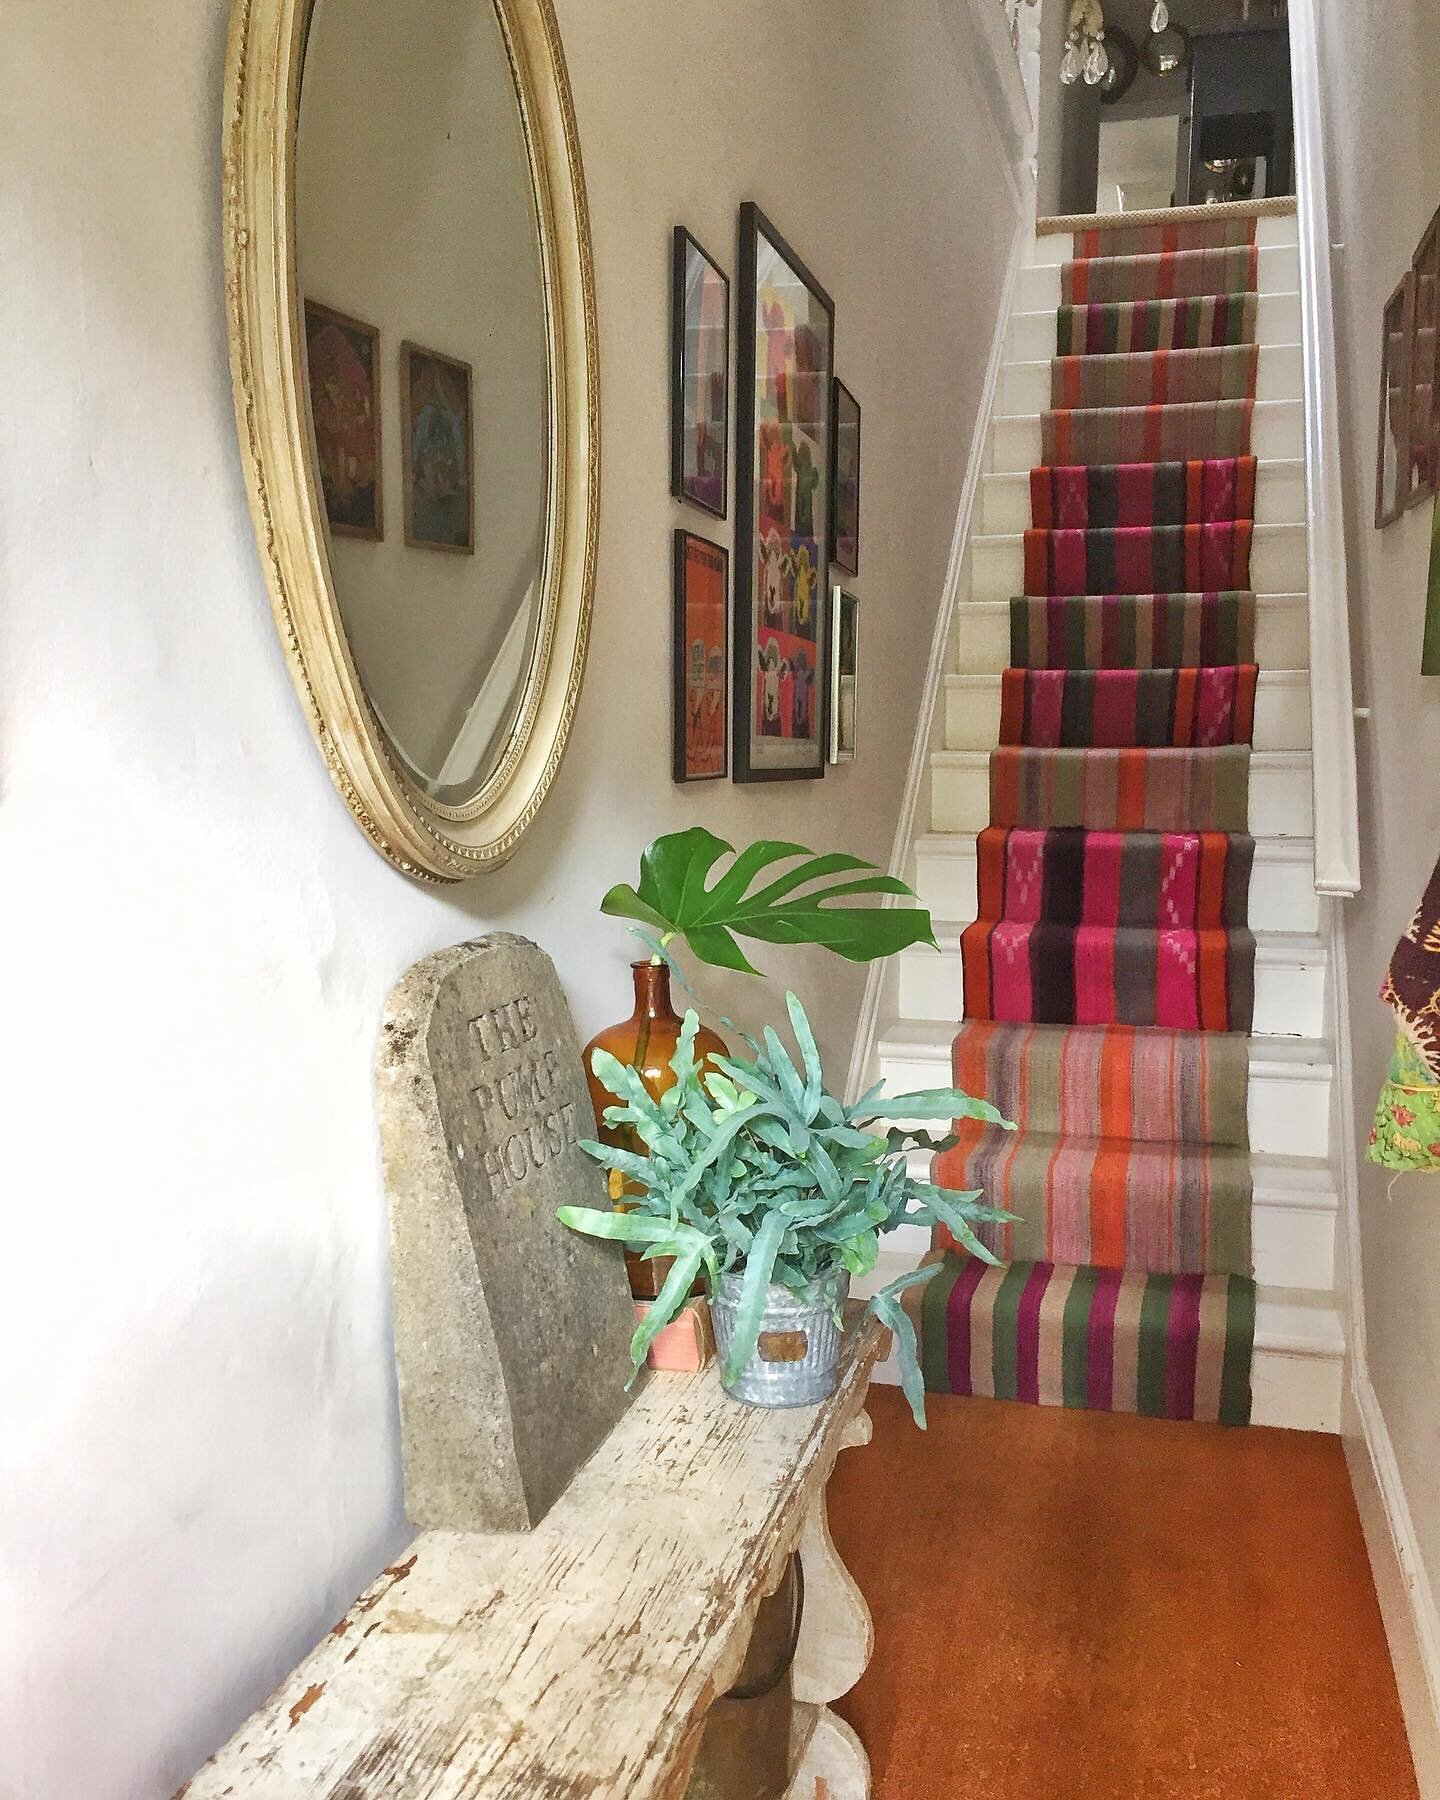 Colour is my speciality and adding wow factor to draw you over the threshold is something I&rsquo;m passionate about. If you have a staircase in the entrance hall it&rsquo;s the perfect place to introduce wow factor with a statement runner. In the ab